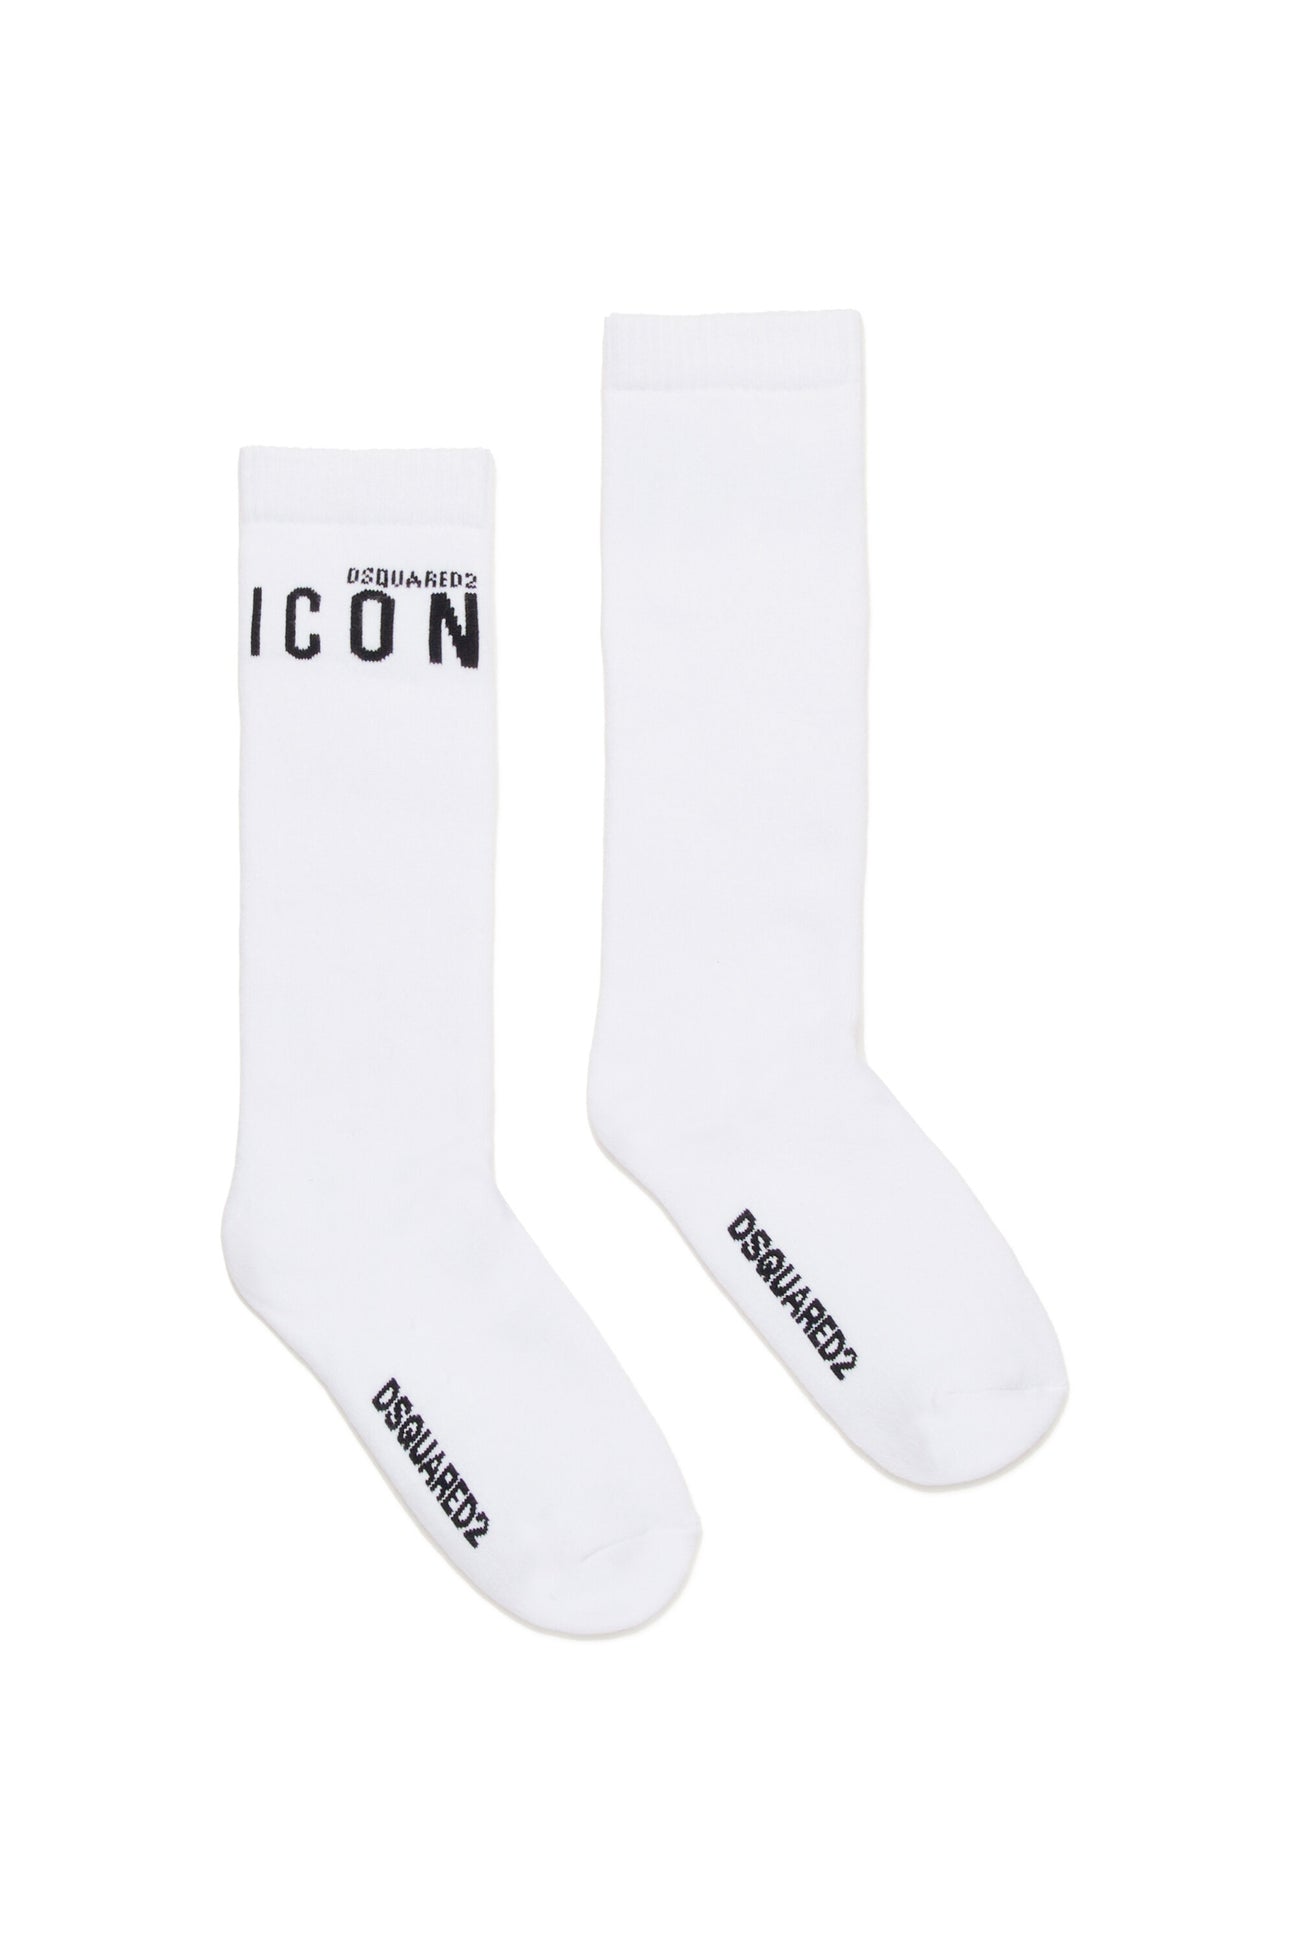 Cotton socks branded with ICON logo 